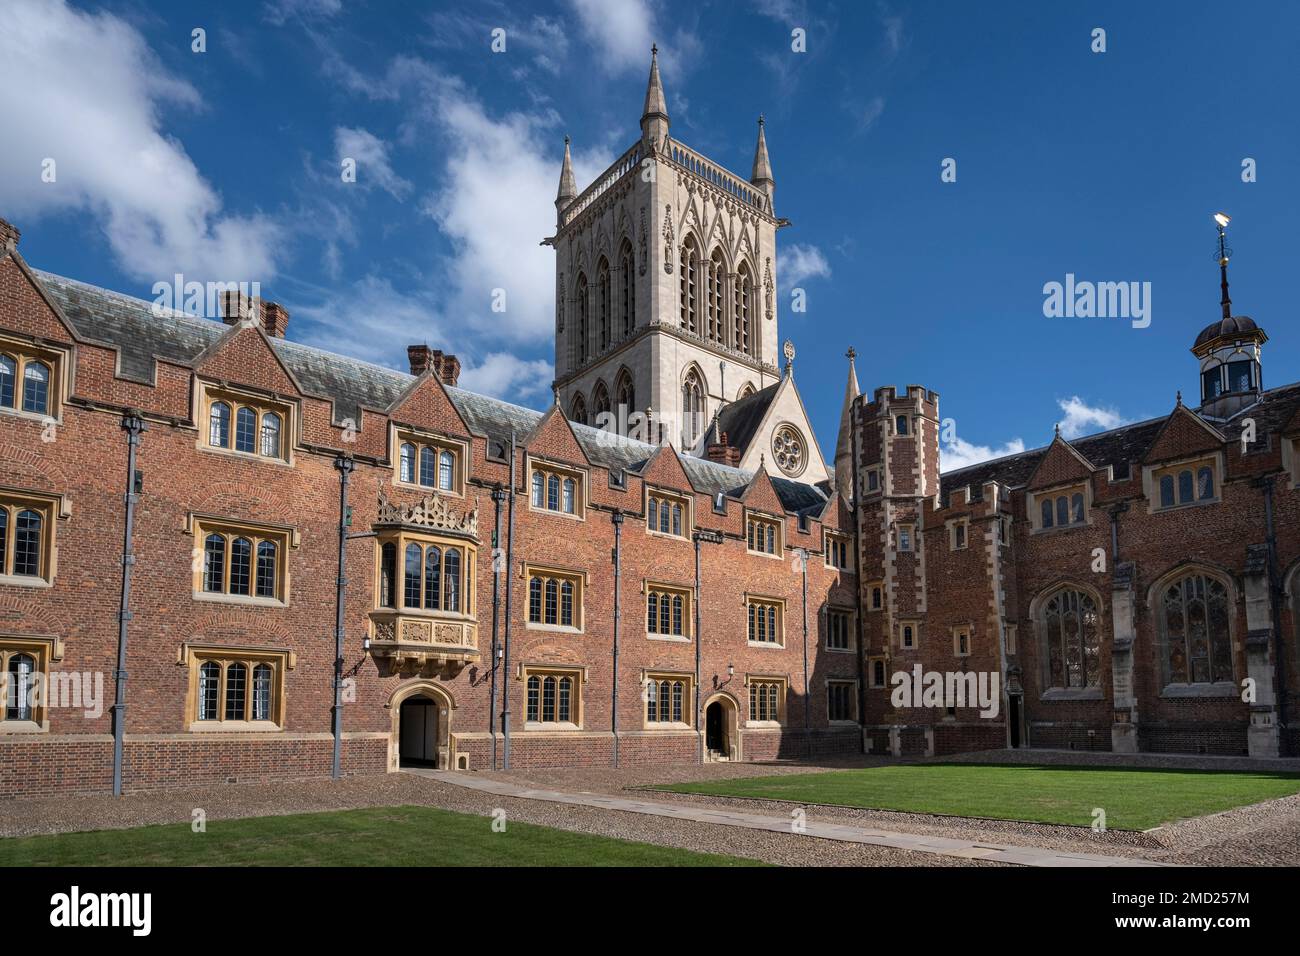 Second Court and St John's College Chapel, St John's College, Cambridge University, Cambridge, Cambridgeshire, England, UK Stock Photo